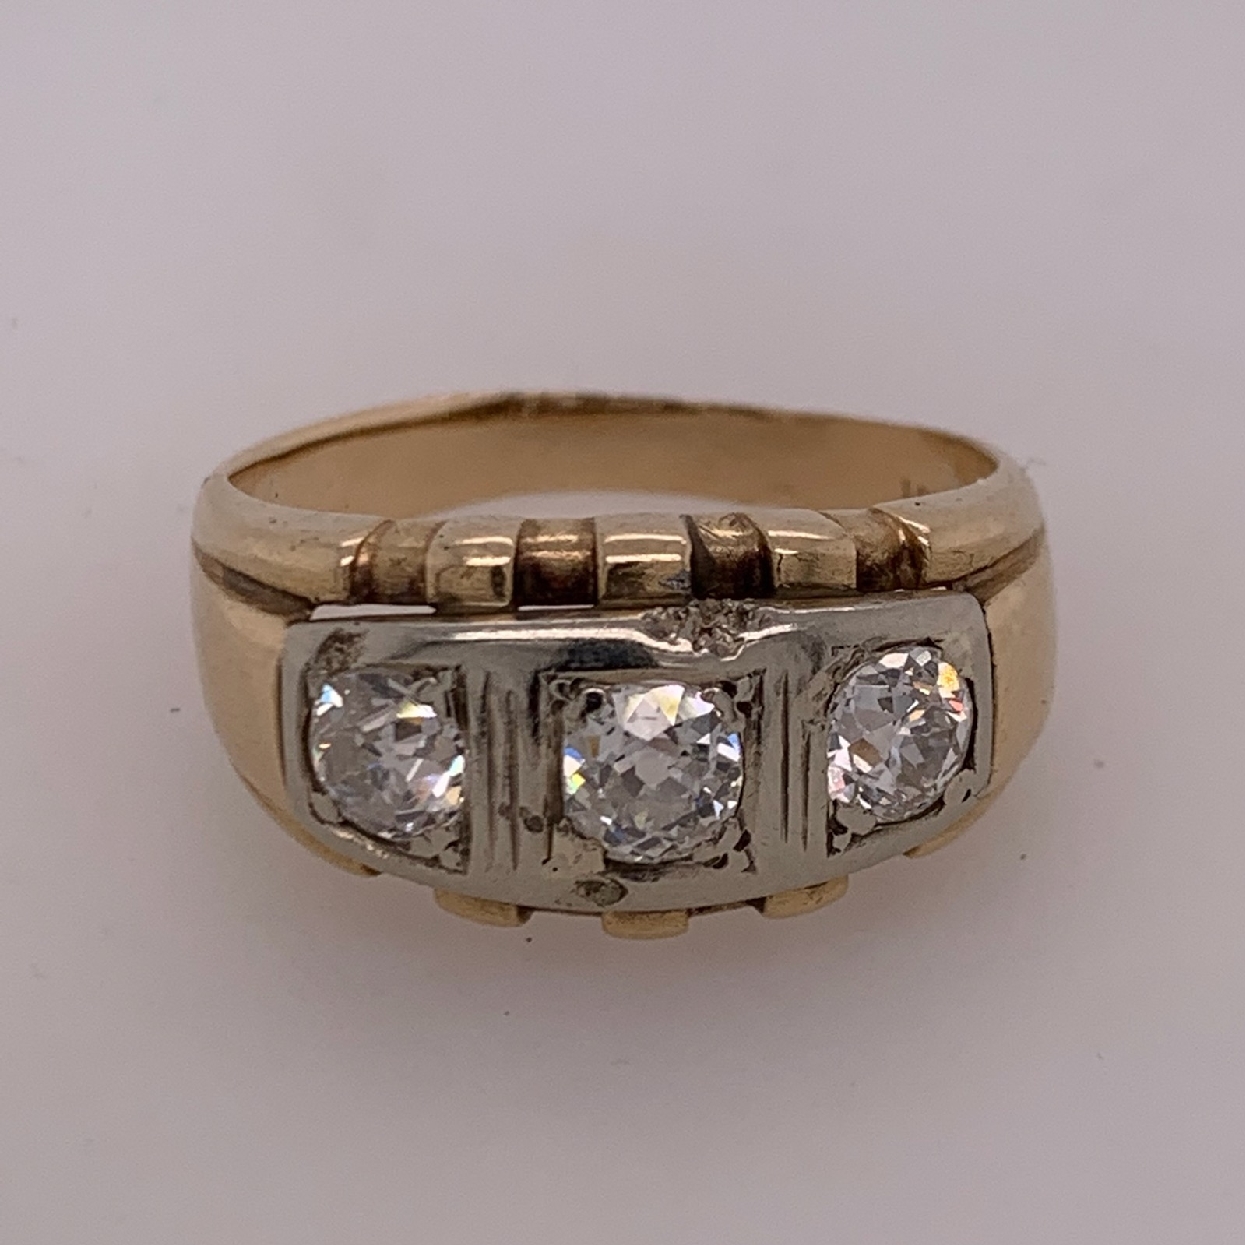 14k Two Tone Gold Antique Diamond Ring with 3 Old Mine Cut Diamonds 1.15 CTTW H / SI1-SI2 Size 11.25 
Comes With Appraisal